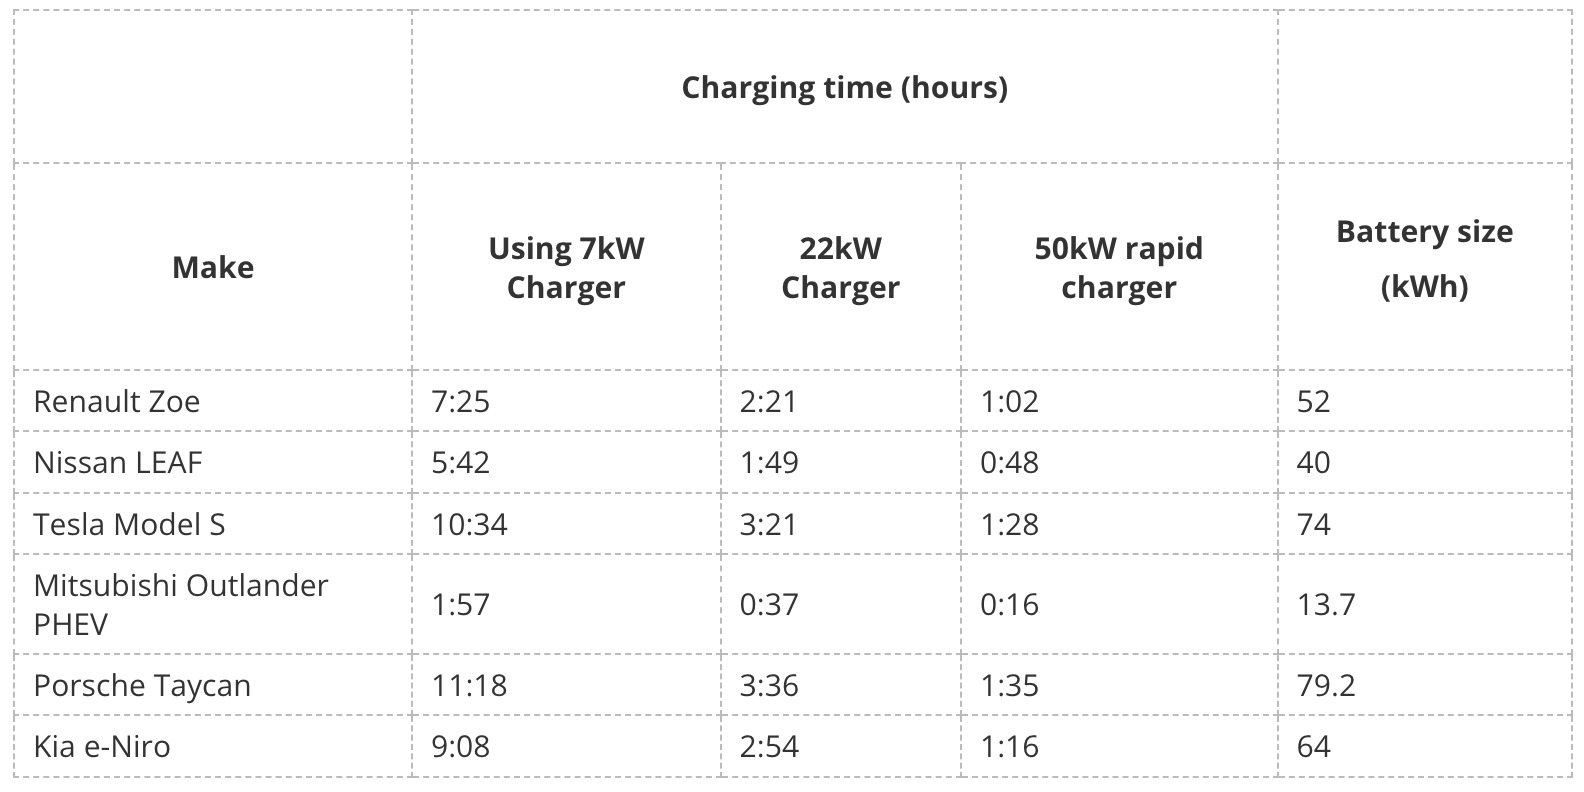 Which cars can charge at 22kW?